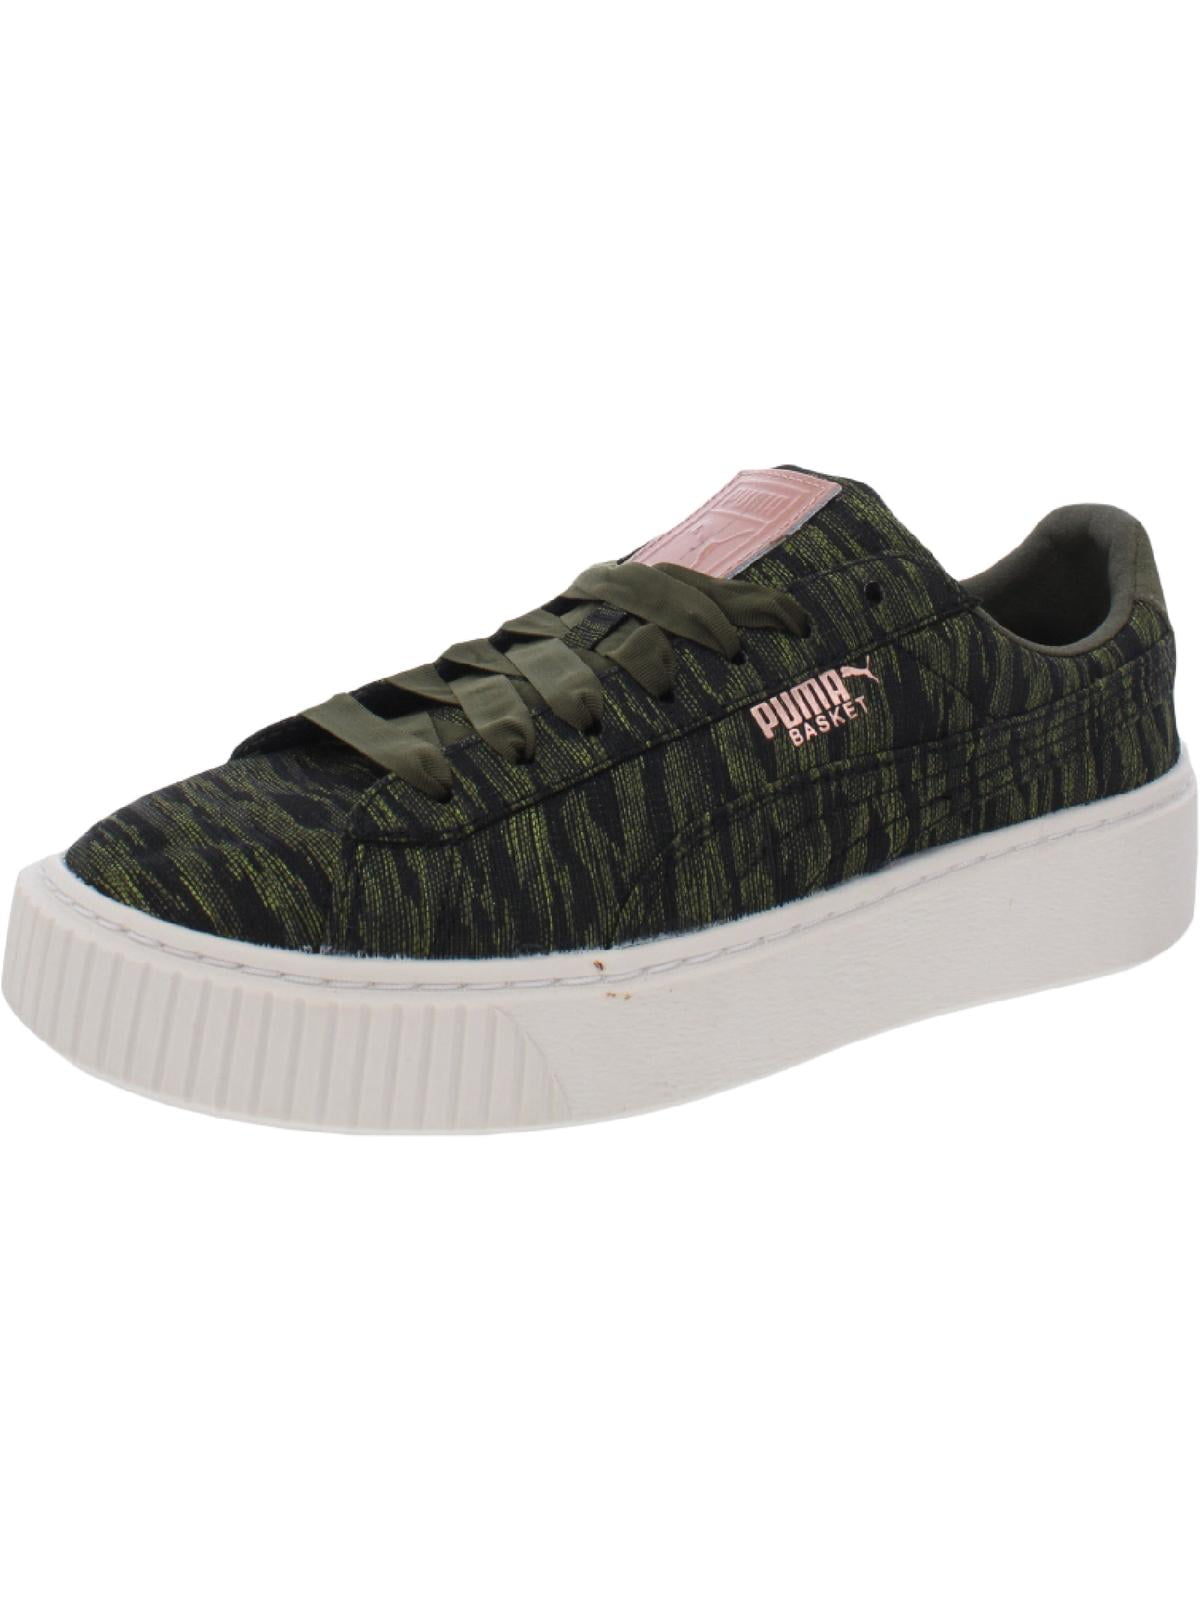 Puma Platform Sole MAYZE MID High-top Sneakers women - Glamood Outlet